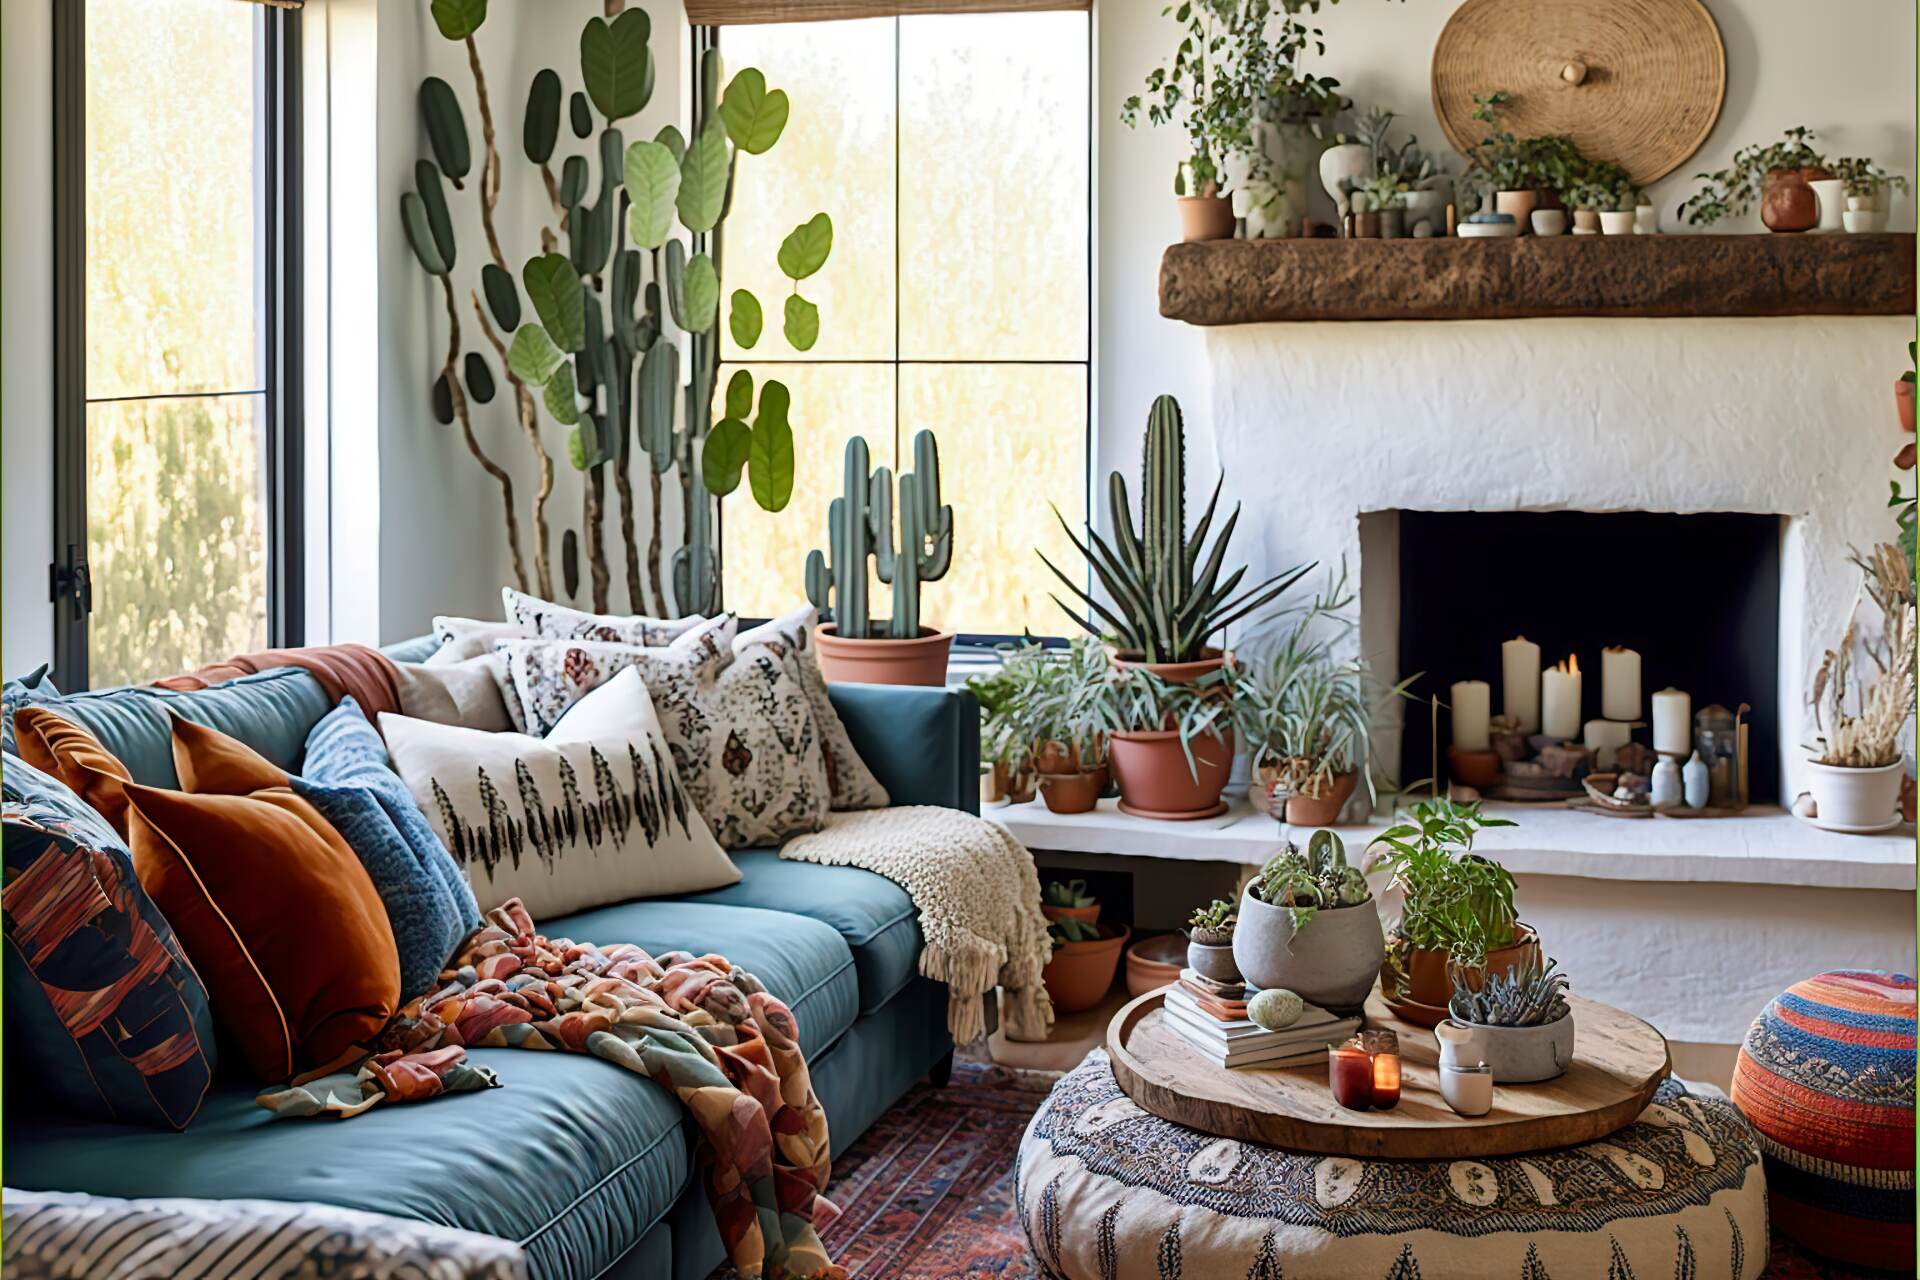 This Bohemian Living Room Boasts An Airy And Light-Filled Aesthetic. A Mix Of Natural Materials Such As Bamboo, Rattan And Jute Add Texture And Warmth To The Space. A Plush Velvet Sofa Sits At The Center Of The Space, Surrounded By A Mix Of Patterned Throw Pillows And Woven Textiles. A Large Woven Tapestry Hangs Above The Fireplace, Adding A Touch Of Global Inspiration To The Design. Potted Plants And A Terrarium Bring Greenery And Natural Elements To The Space.